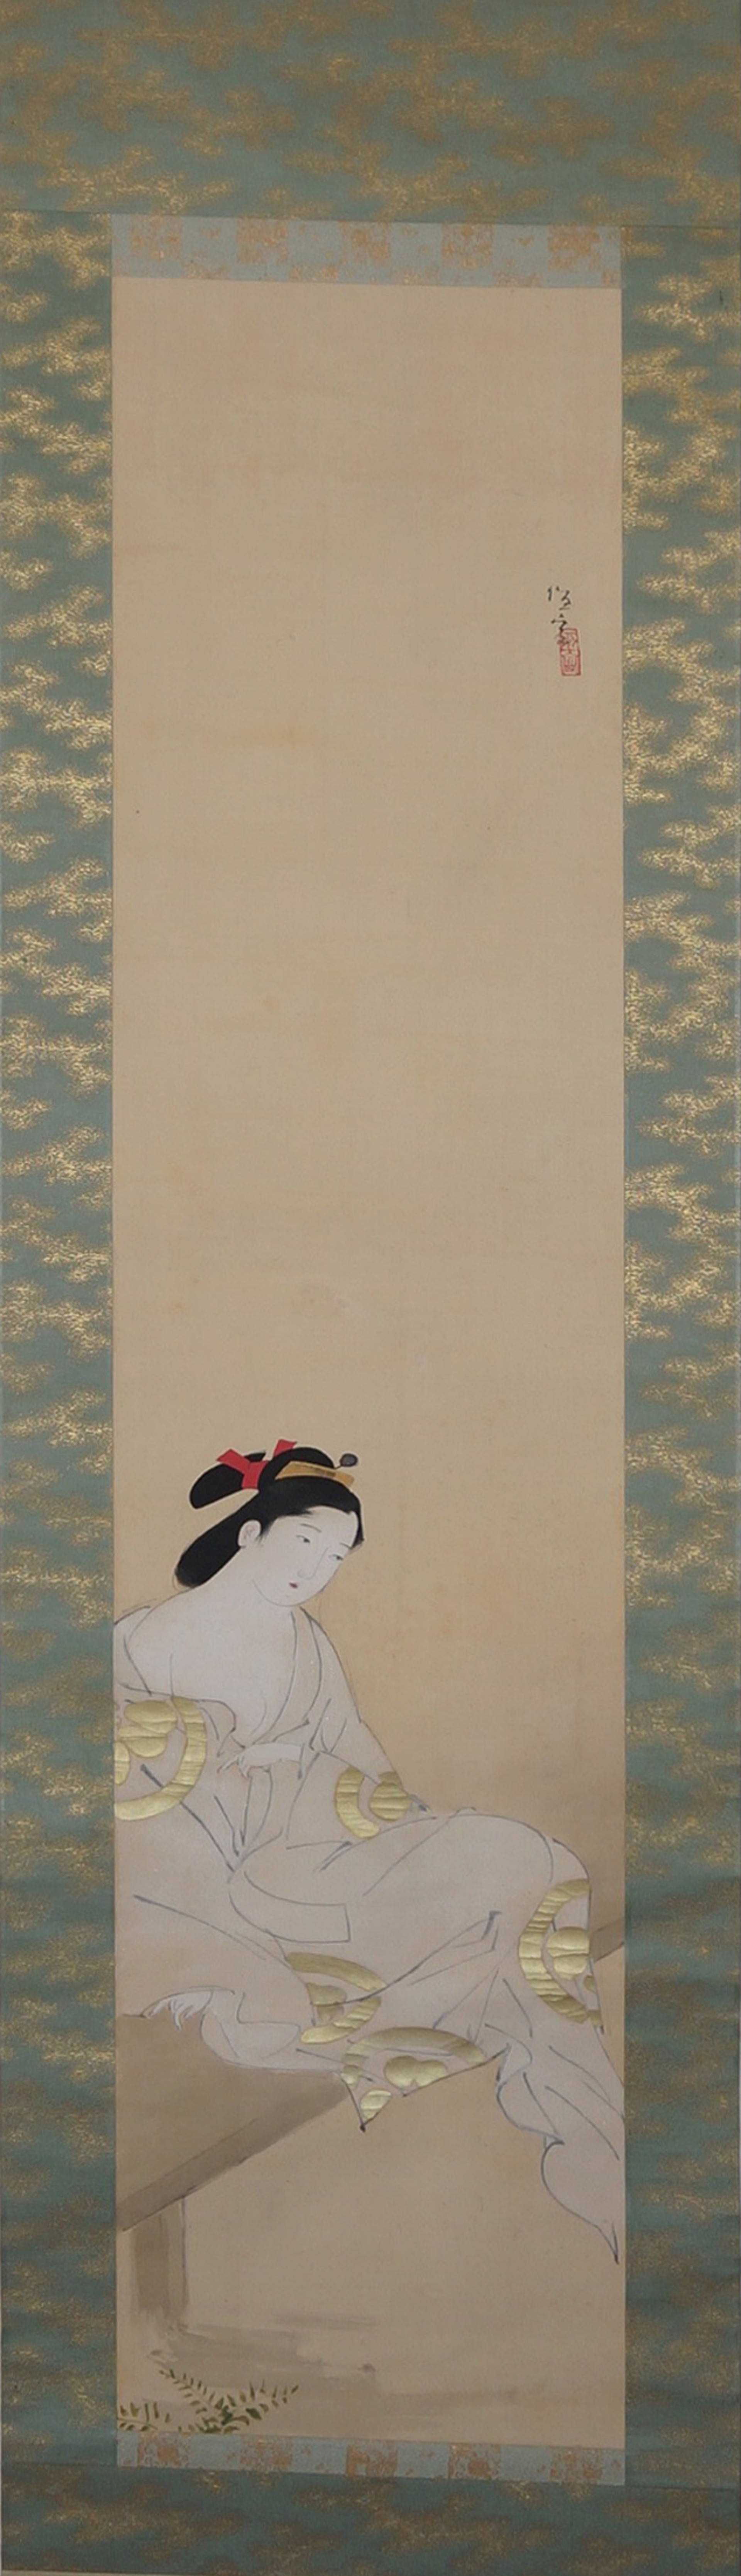 After the Bath by Tsunetomi Kitano